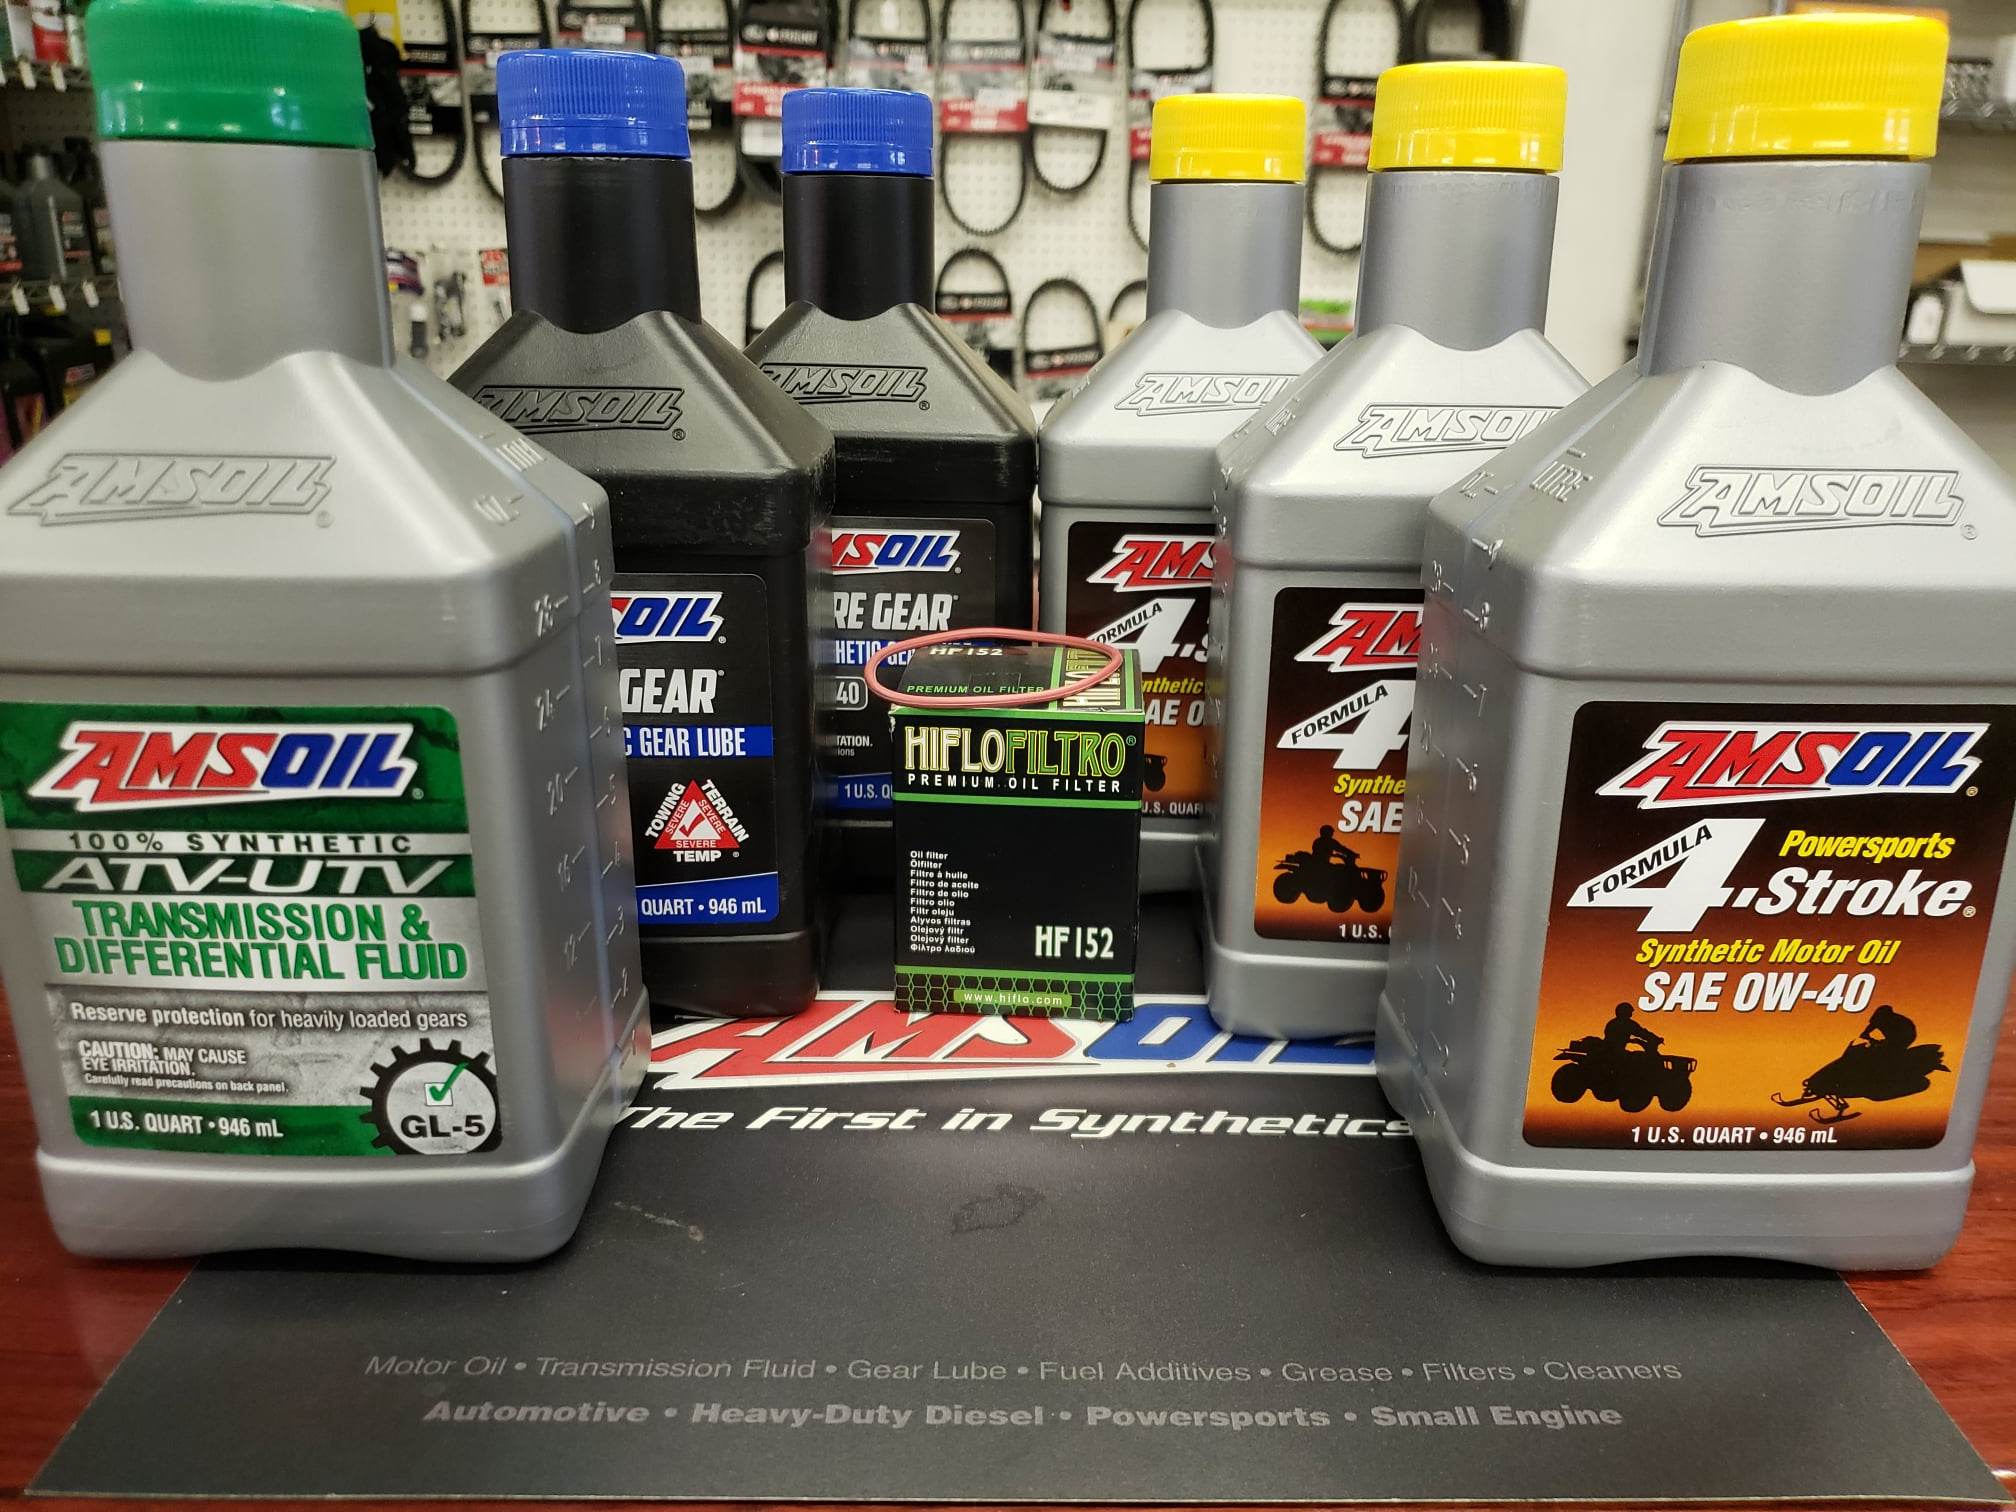 OIL AND OIL CHANGE KITS